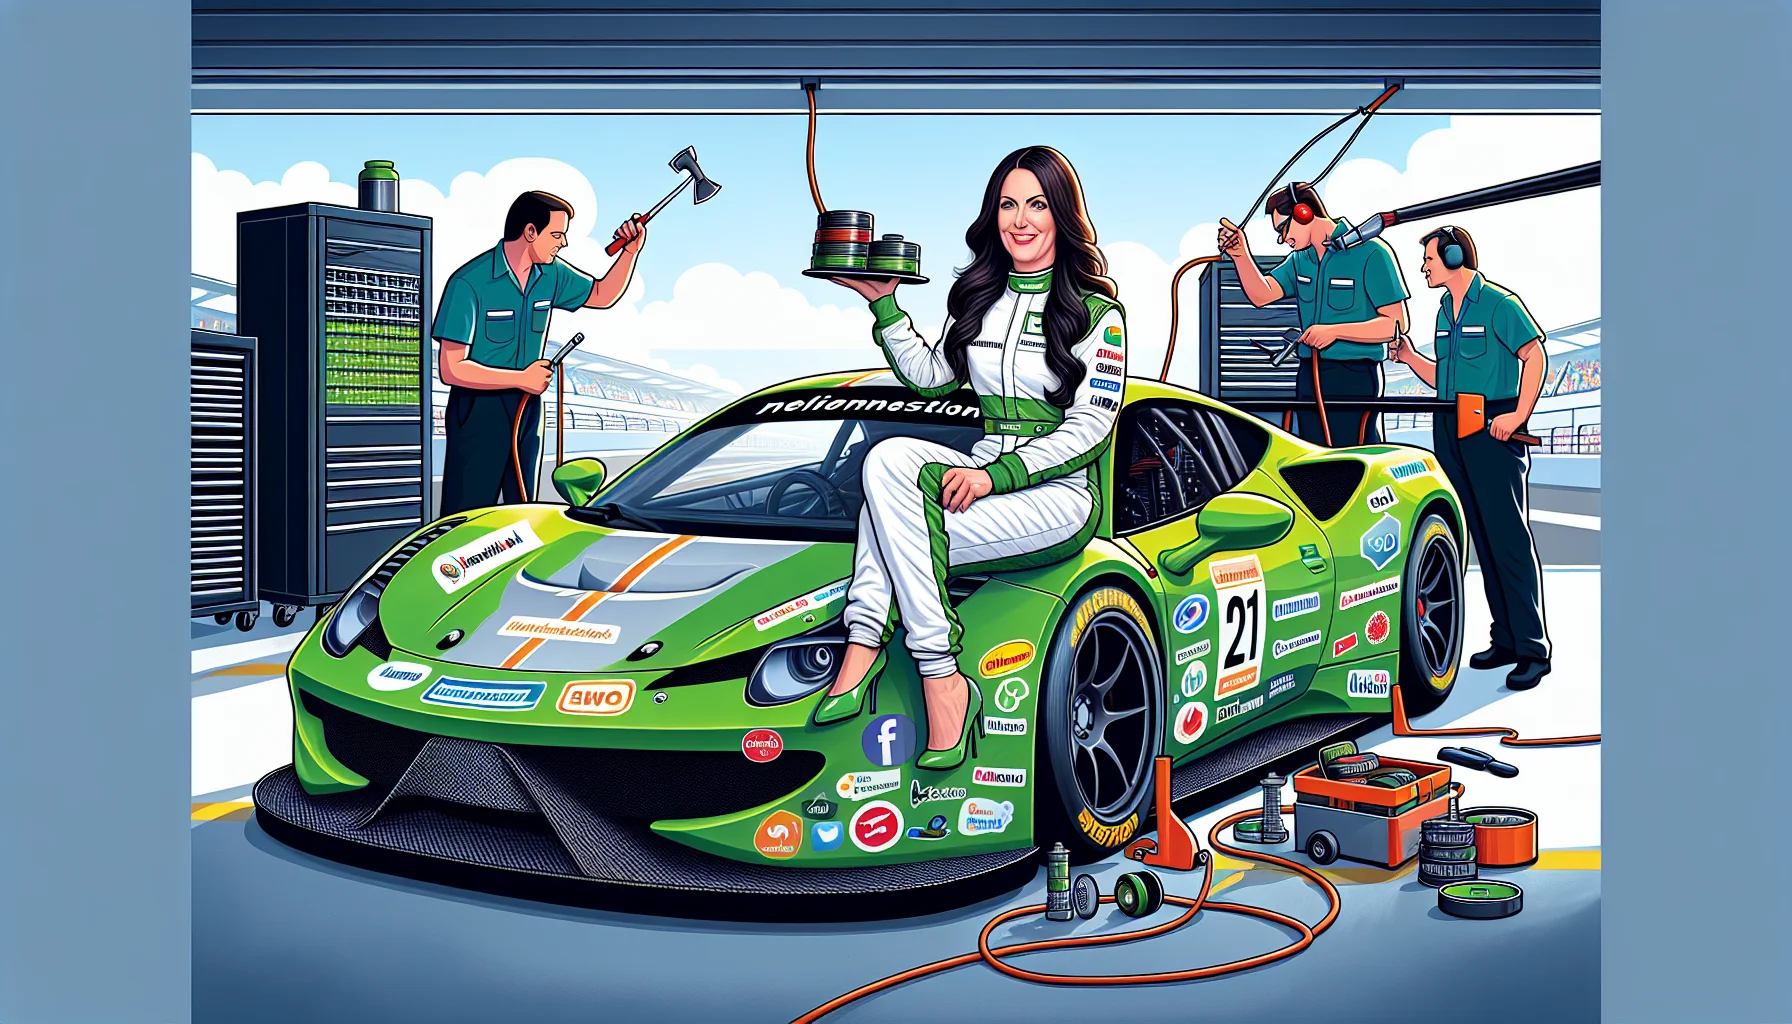 Create a detailed and humorous image presenting an experienced female race car driver known for her ties to a notable web hosting company. She's seated in her signature green sports car, adorned with various internet and tech-themed stickers. The situation involves a clever play on web hosting, perhaps the car pit-stop being transformed into a 'data center' with mechanics executing operations like 'site optimization', 'server configuration' and 'database backups'.